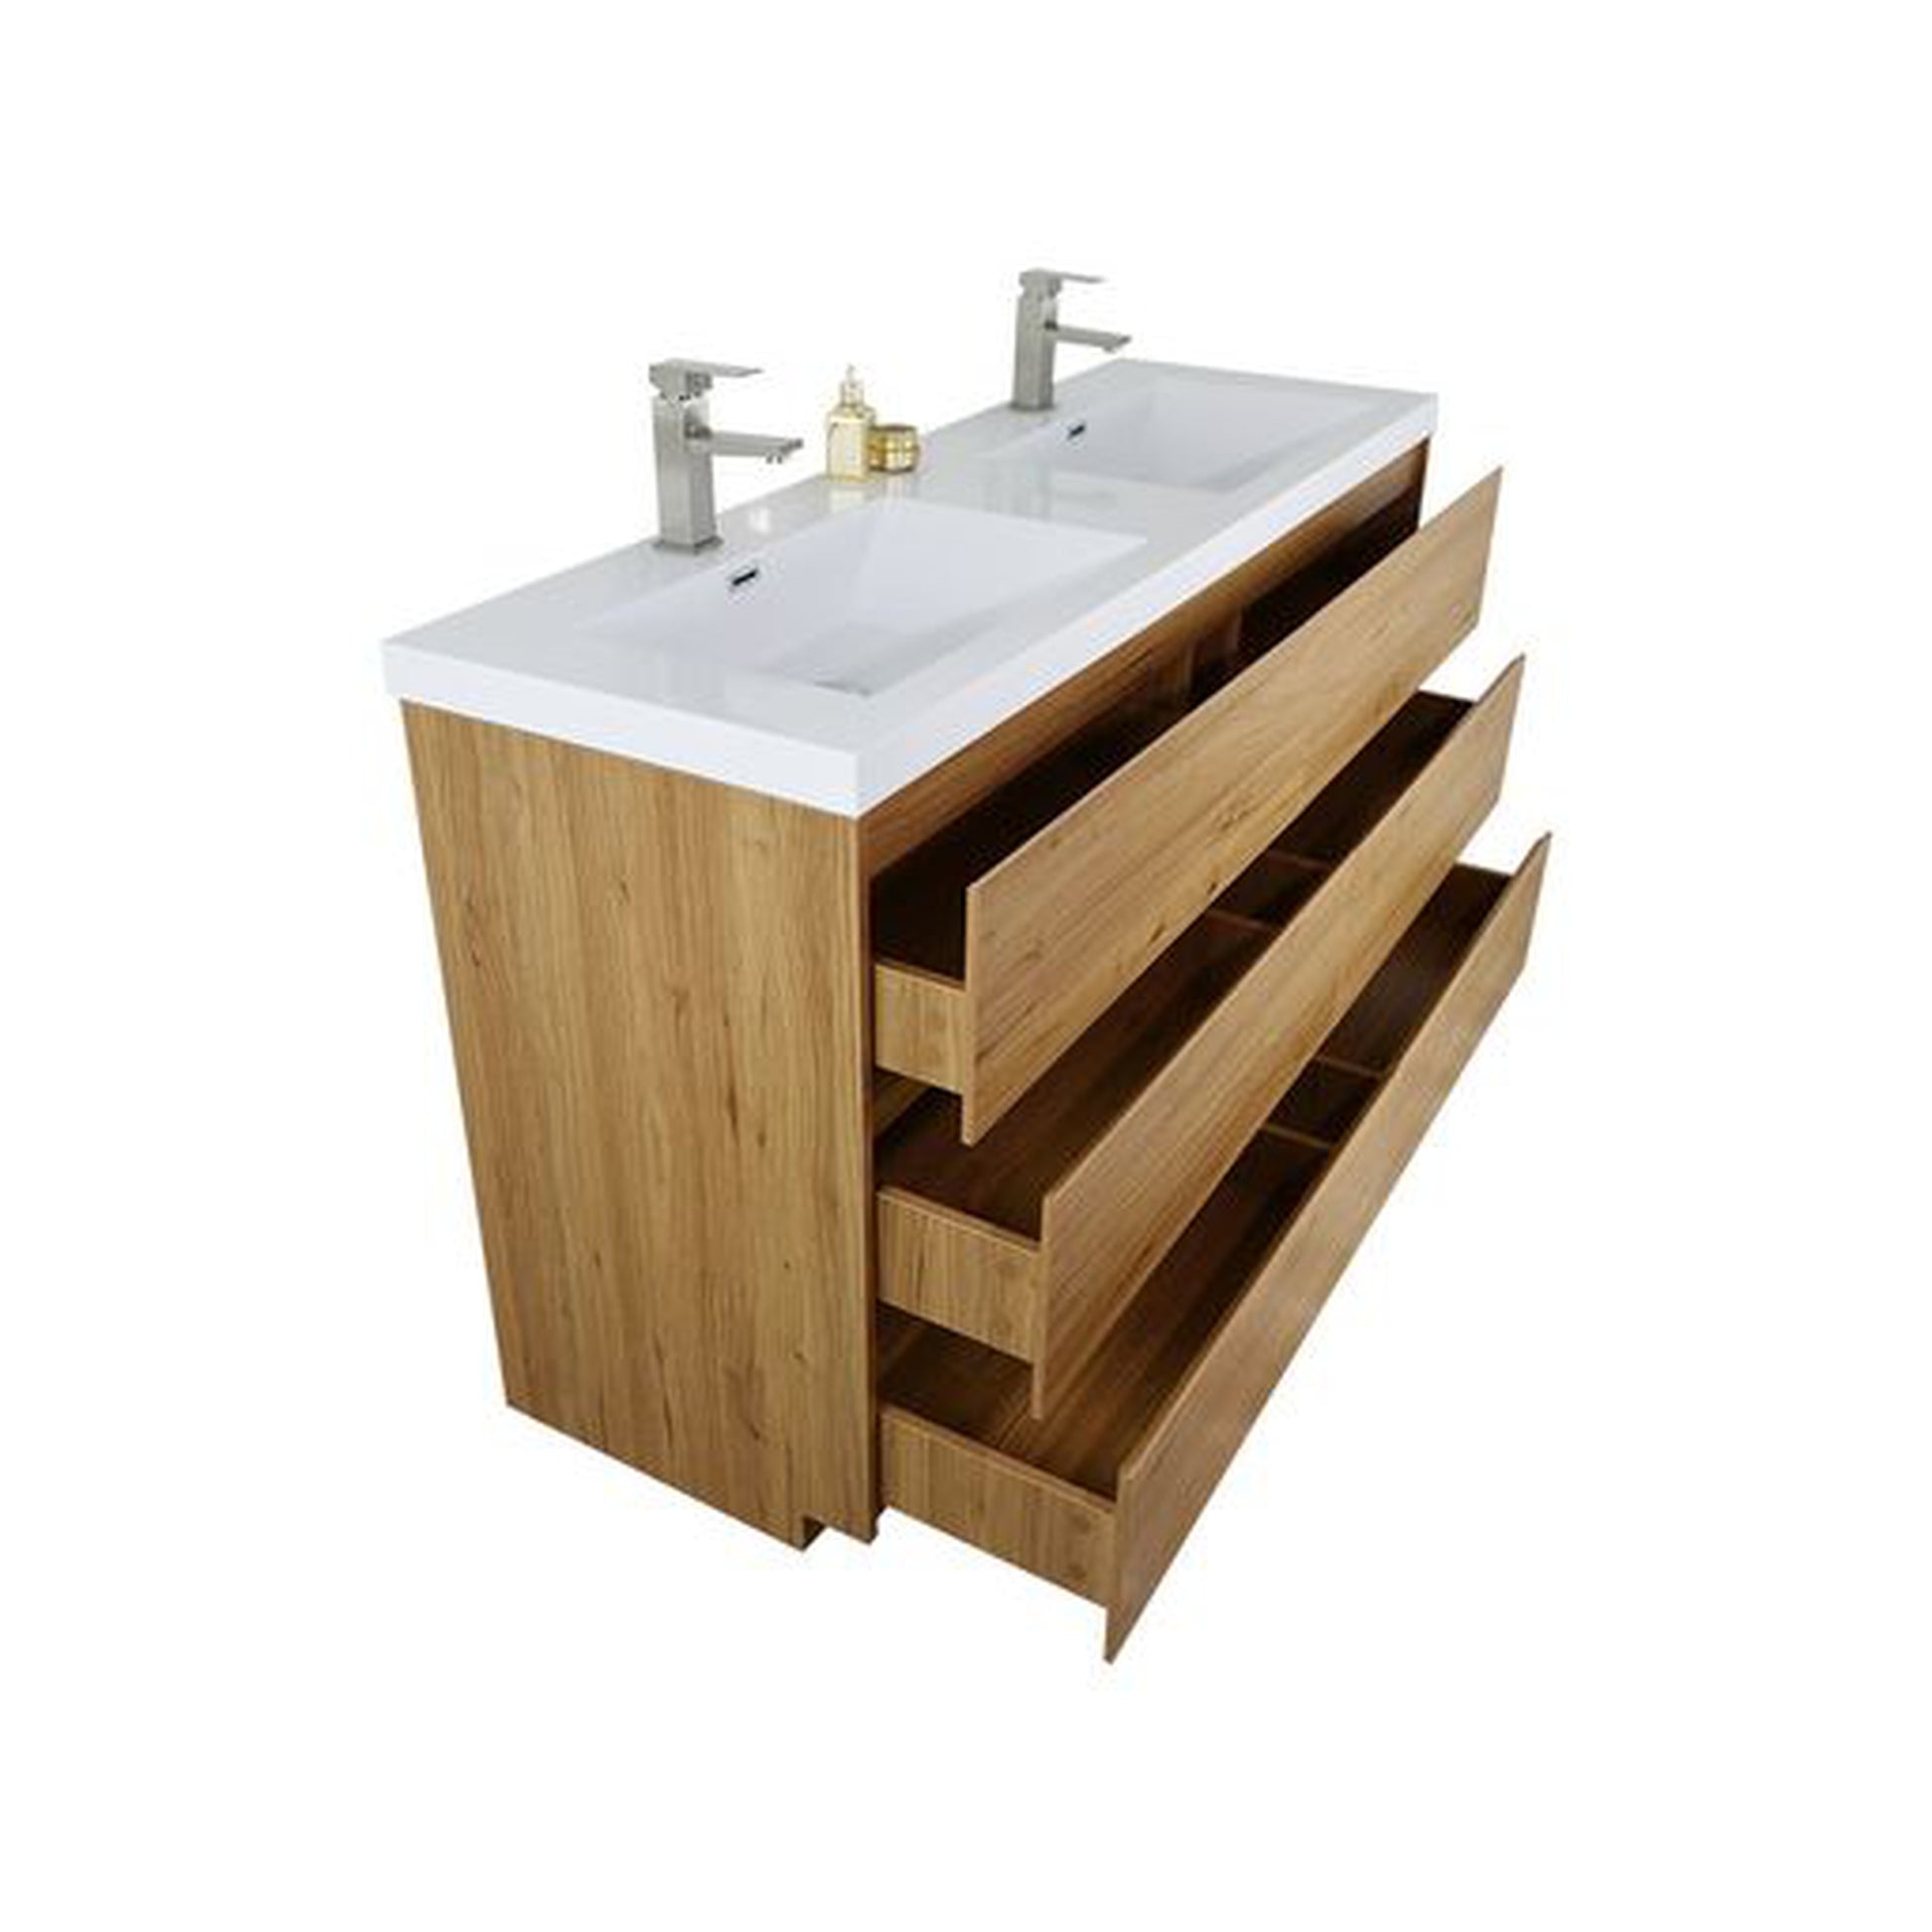 Moreno Bath Angeles 60" Nature Oak Freestanding Vanity With Double Reinforced White Acrylic Sinks